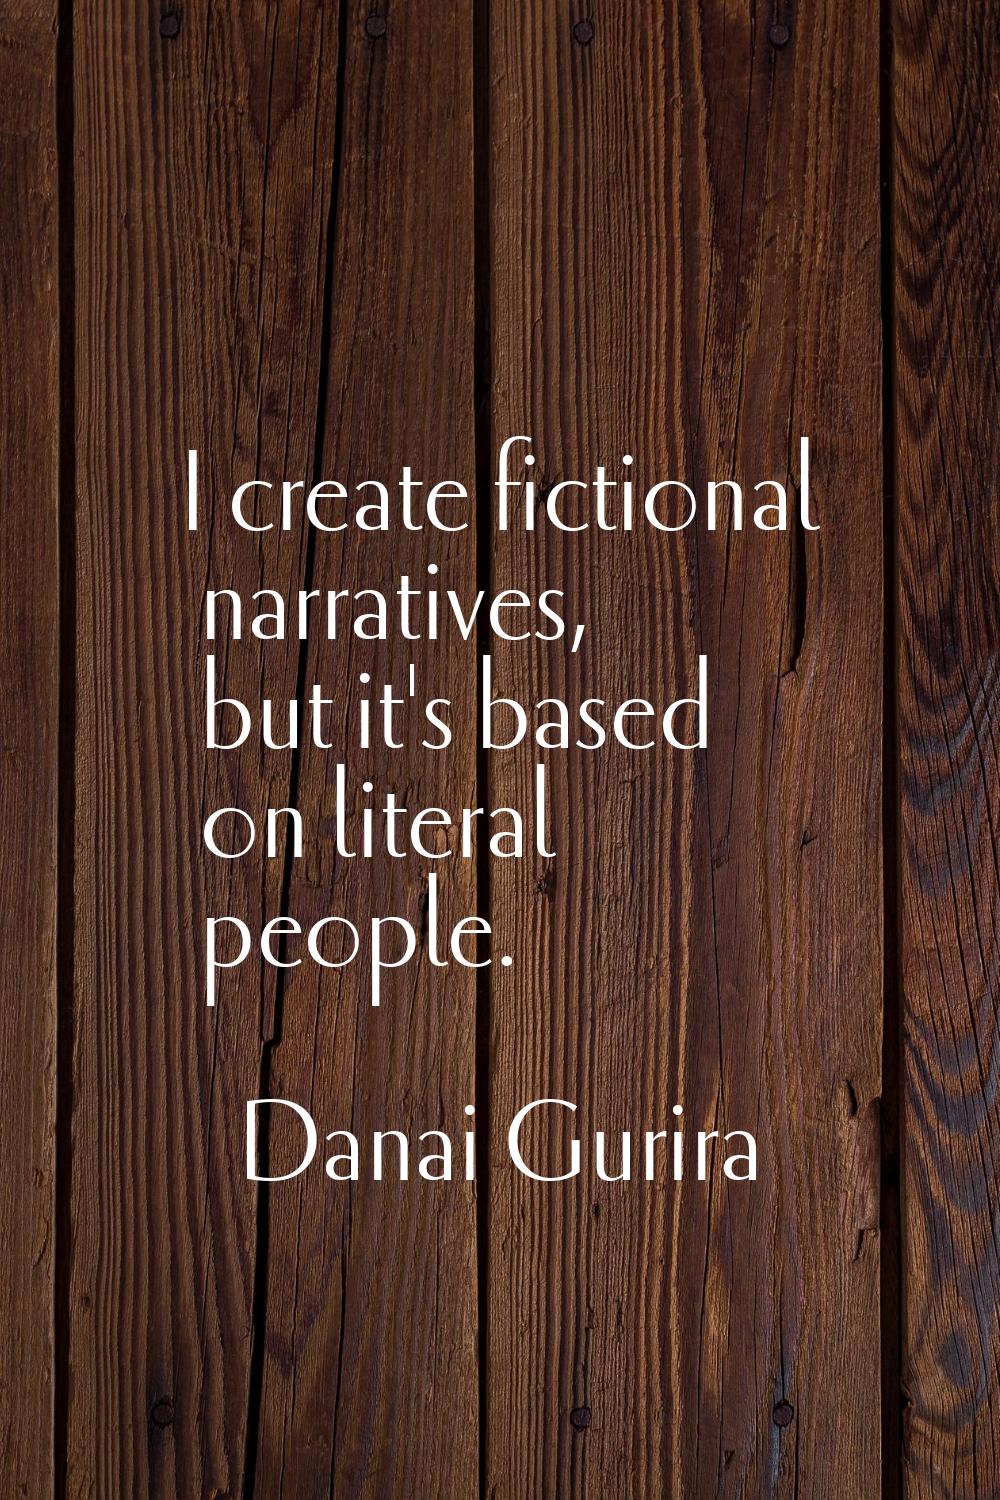 I create fictional narratives, but it's based on literal people.